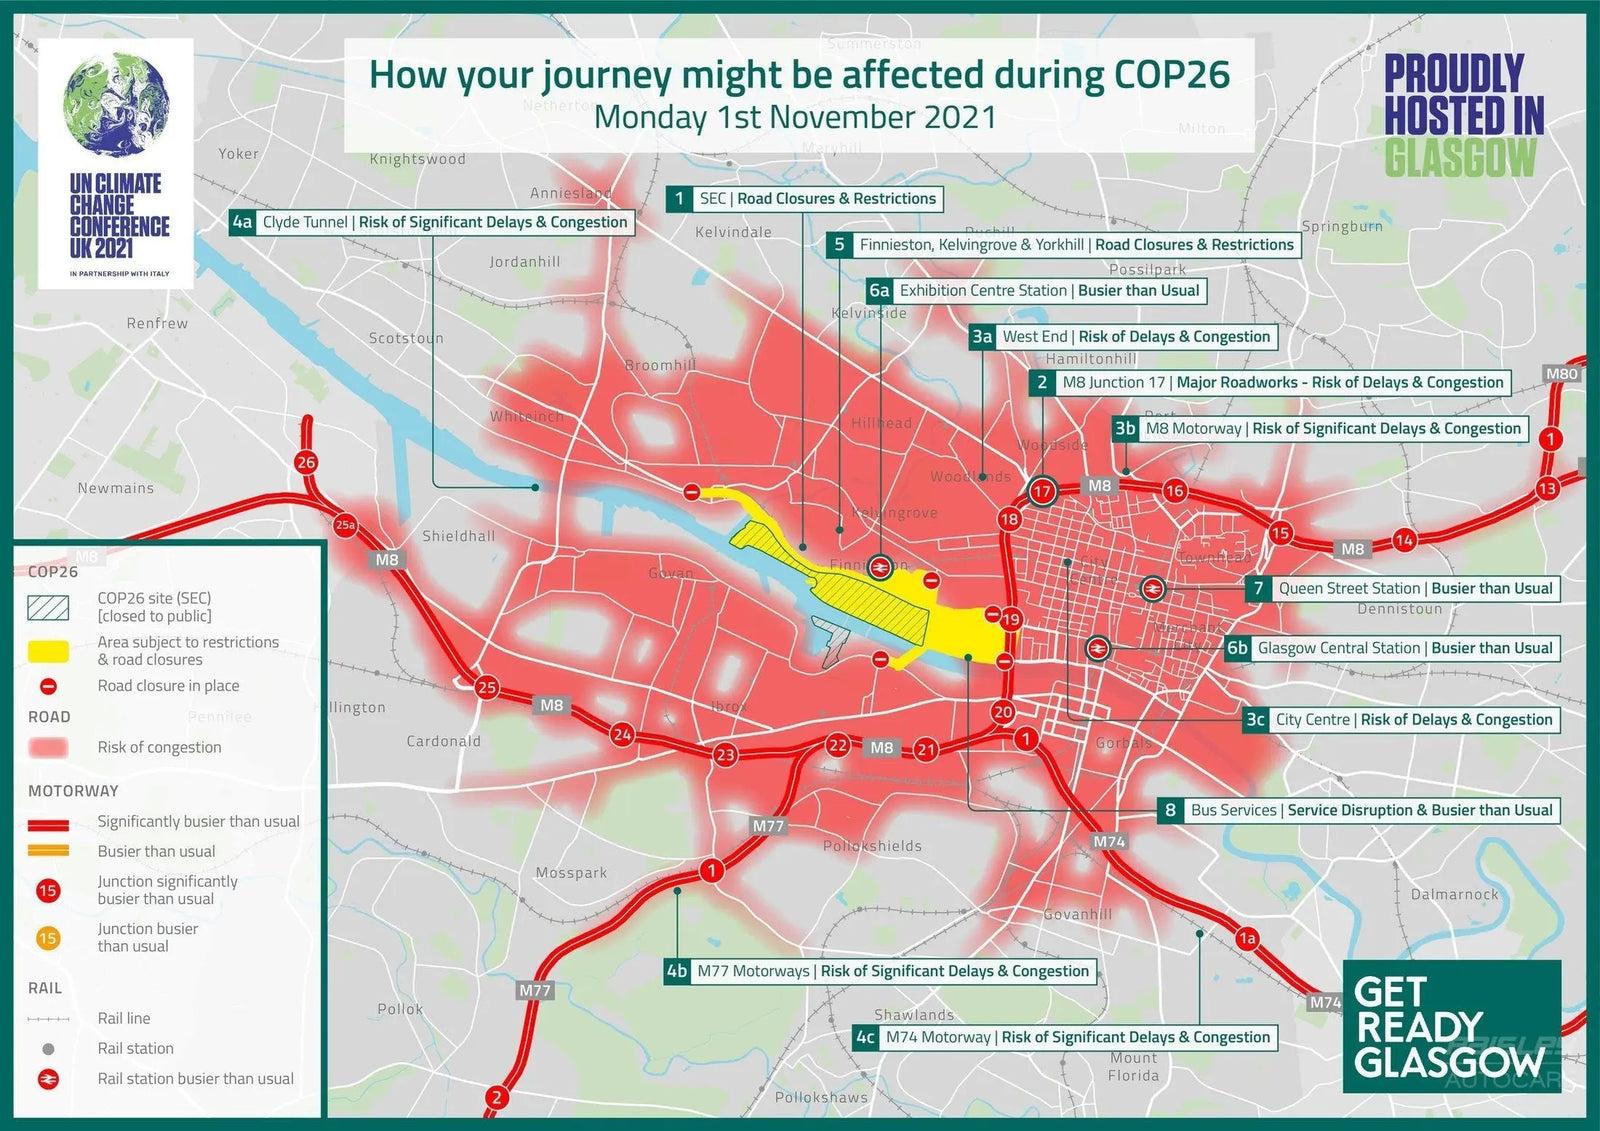 Glasgow road closures will be in full effect and major routes closed for the next few days as COP26 approaches | Paisley Autocare